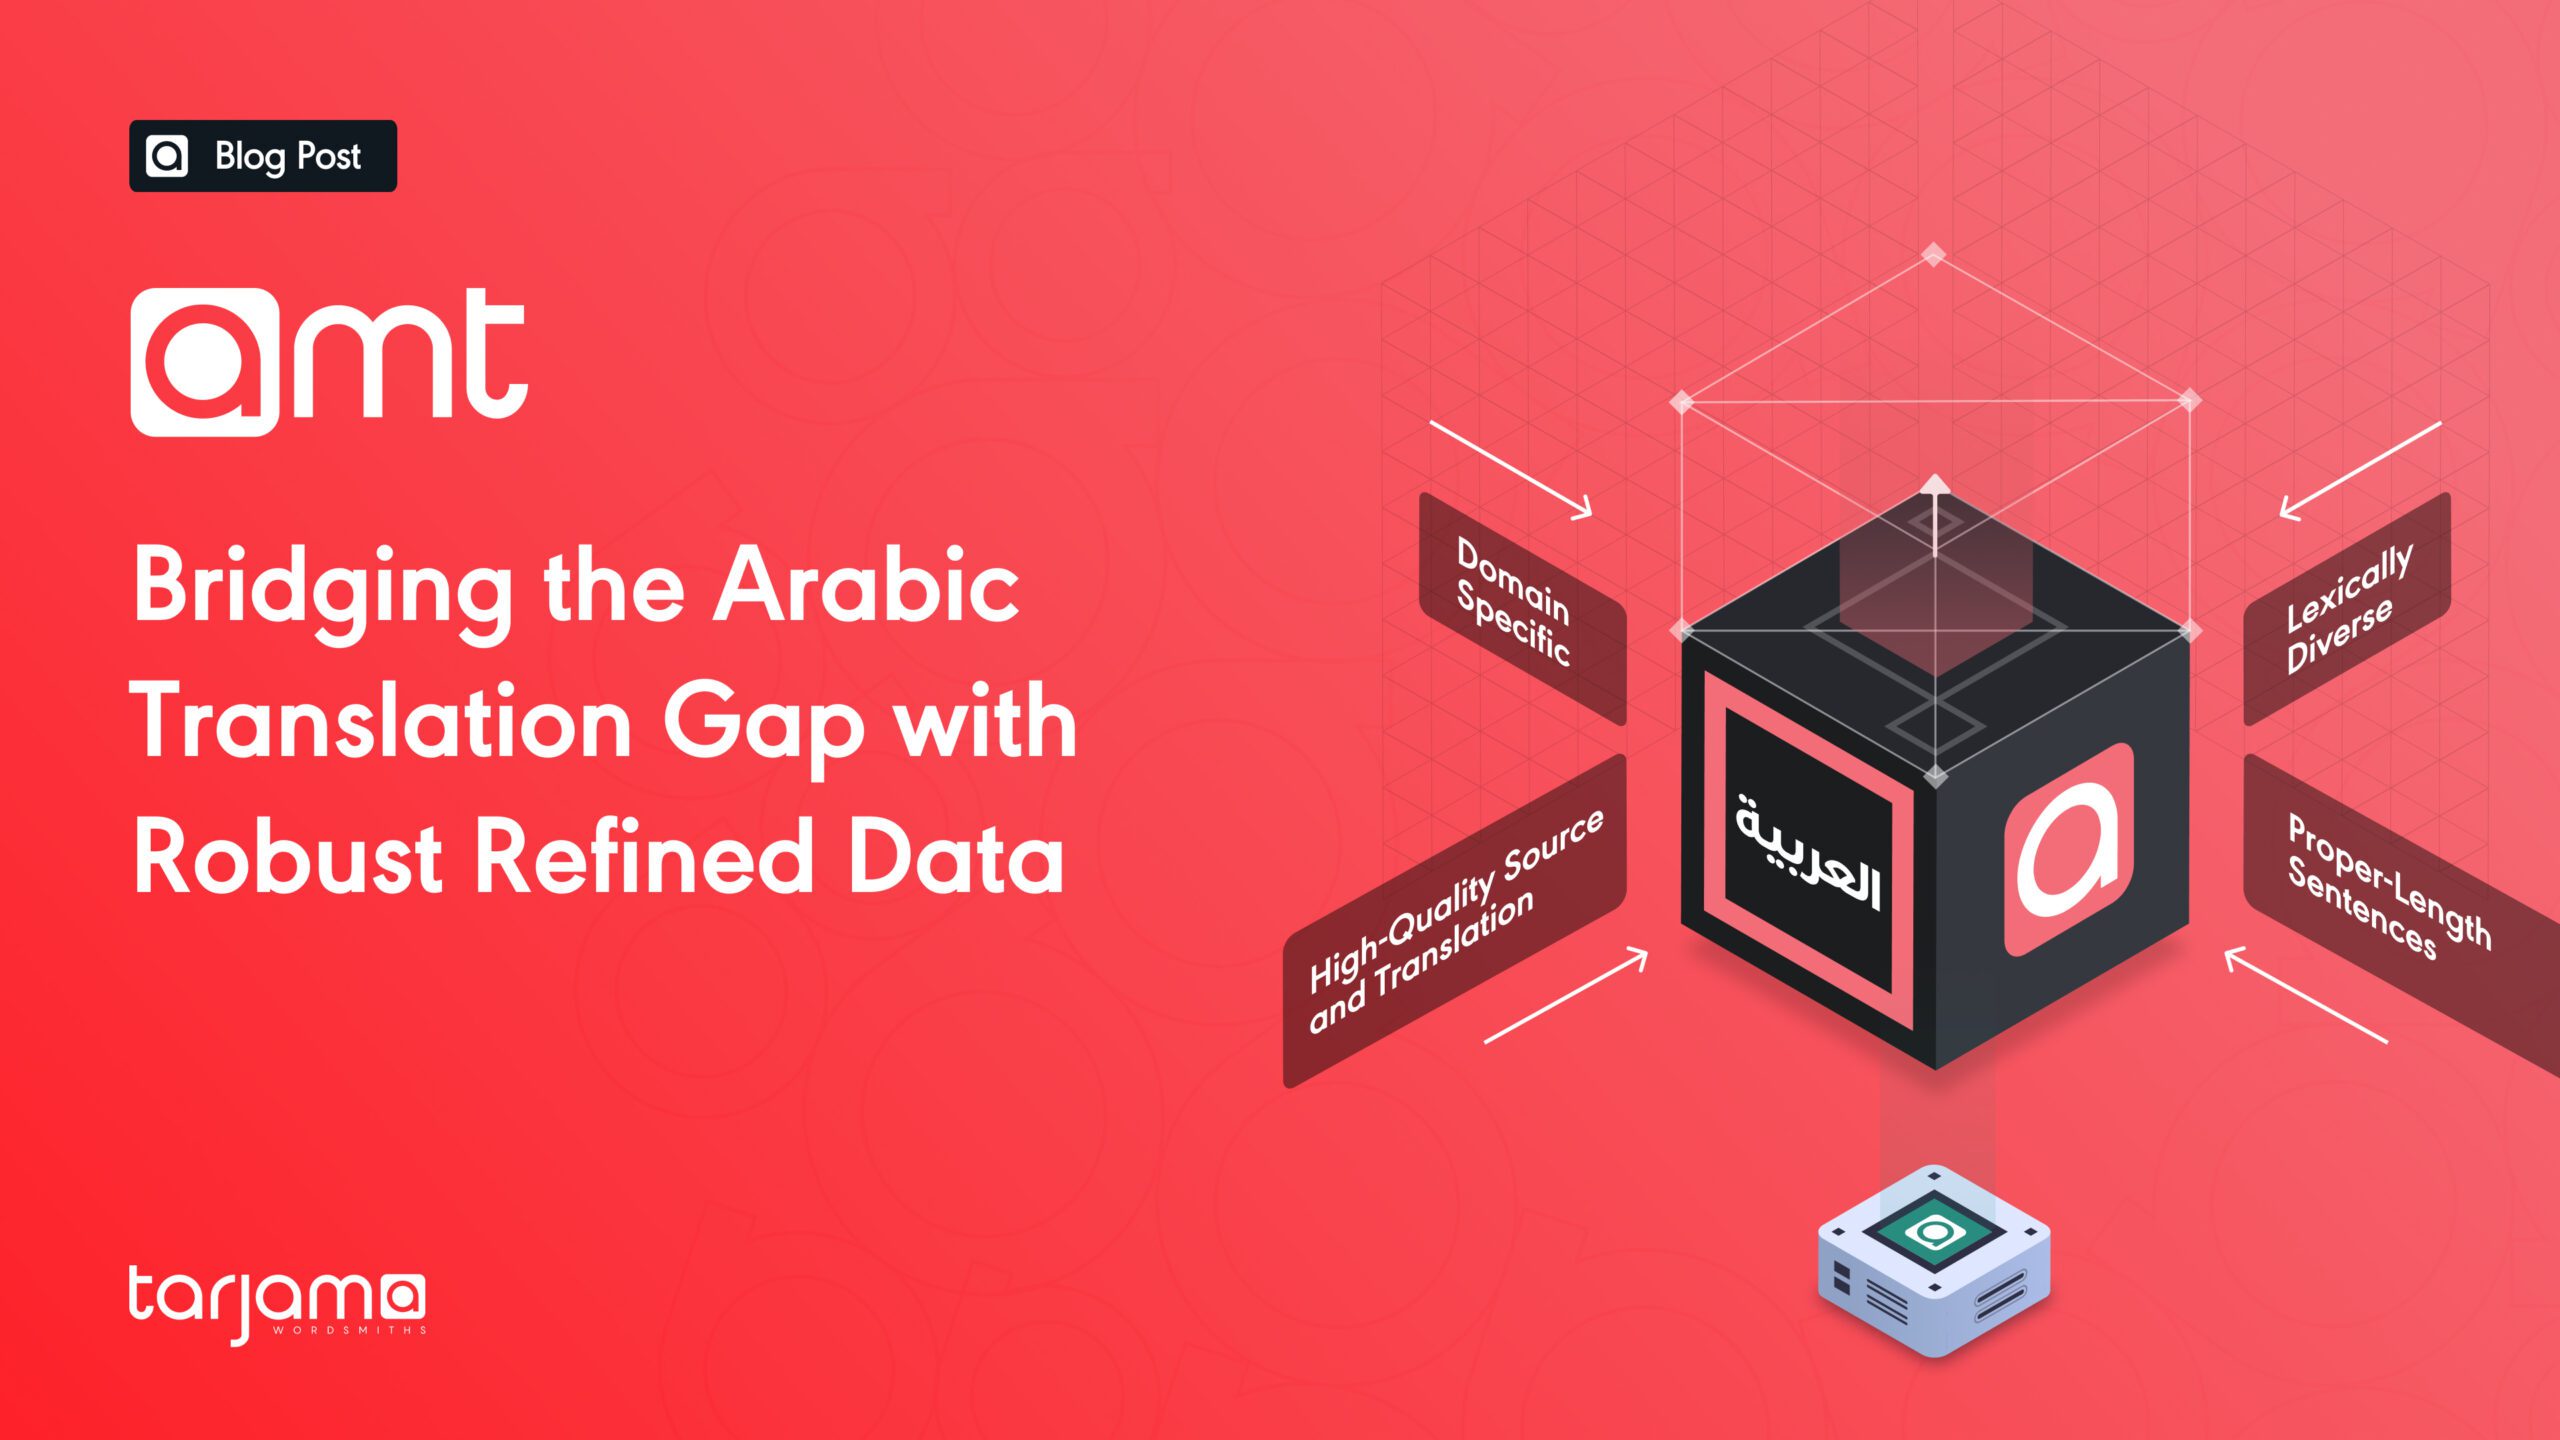 AMT: Bridging the Arabic Translation Gap with Robust Refined Data.